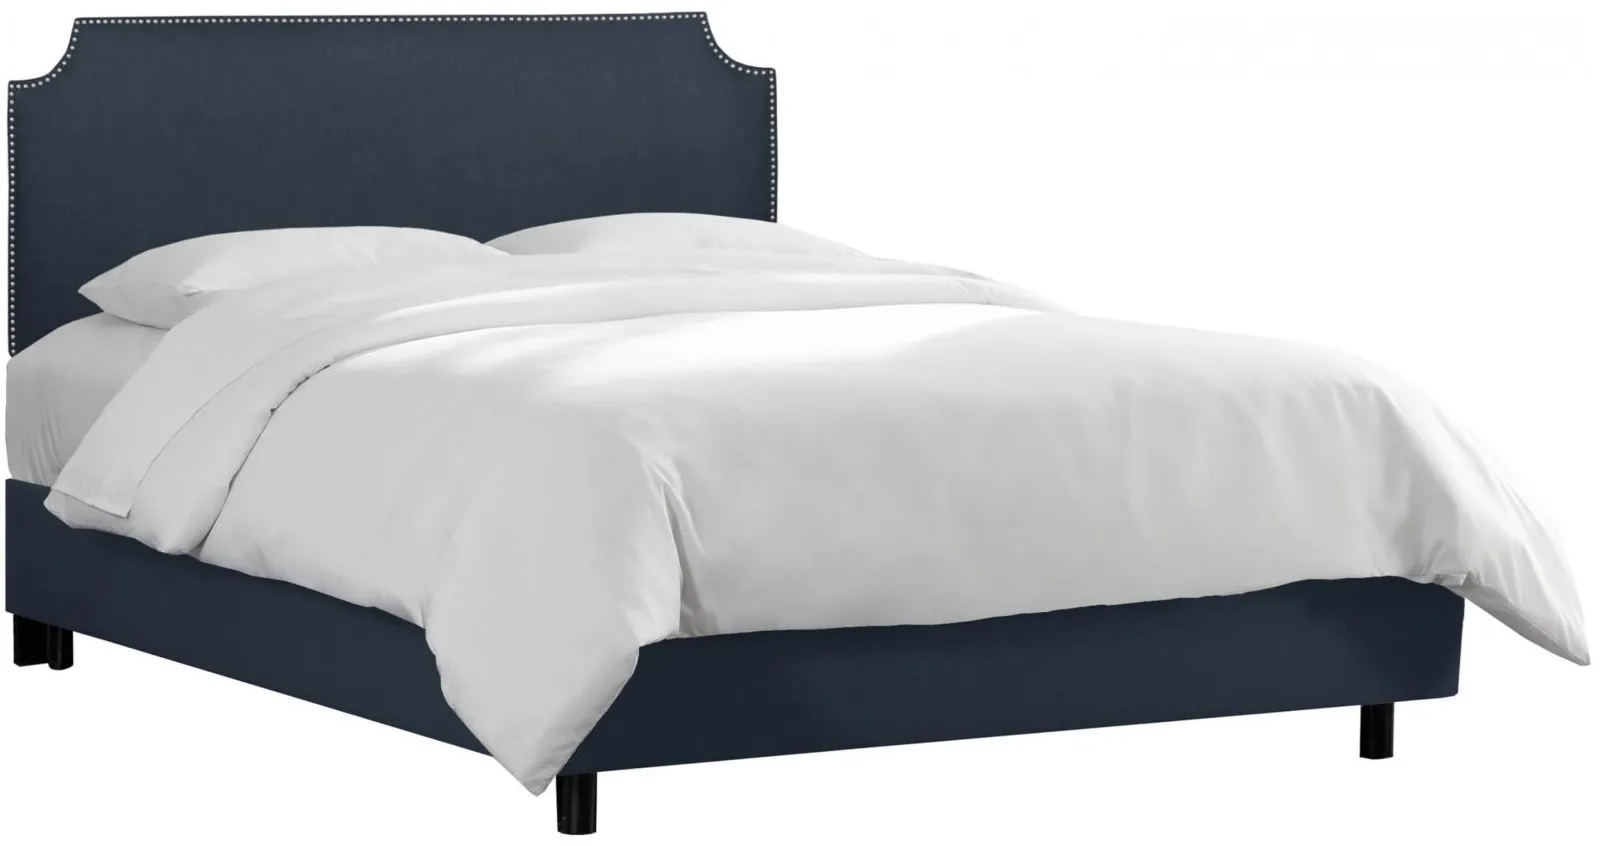 McGee Bed in Linen Navy by Skyline